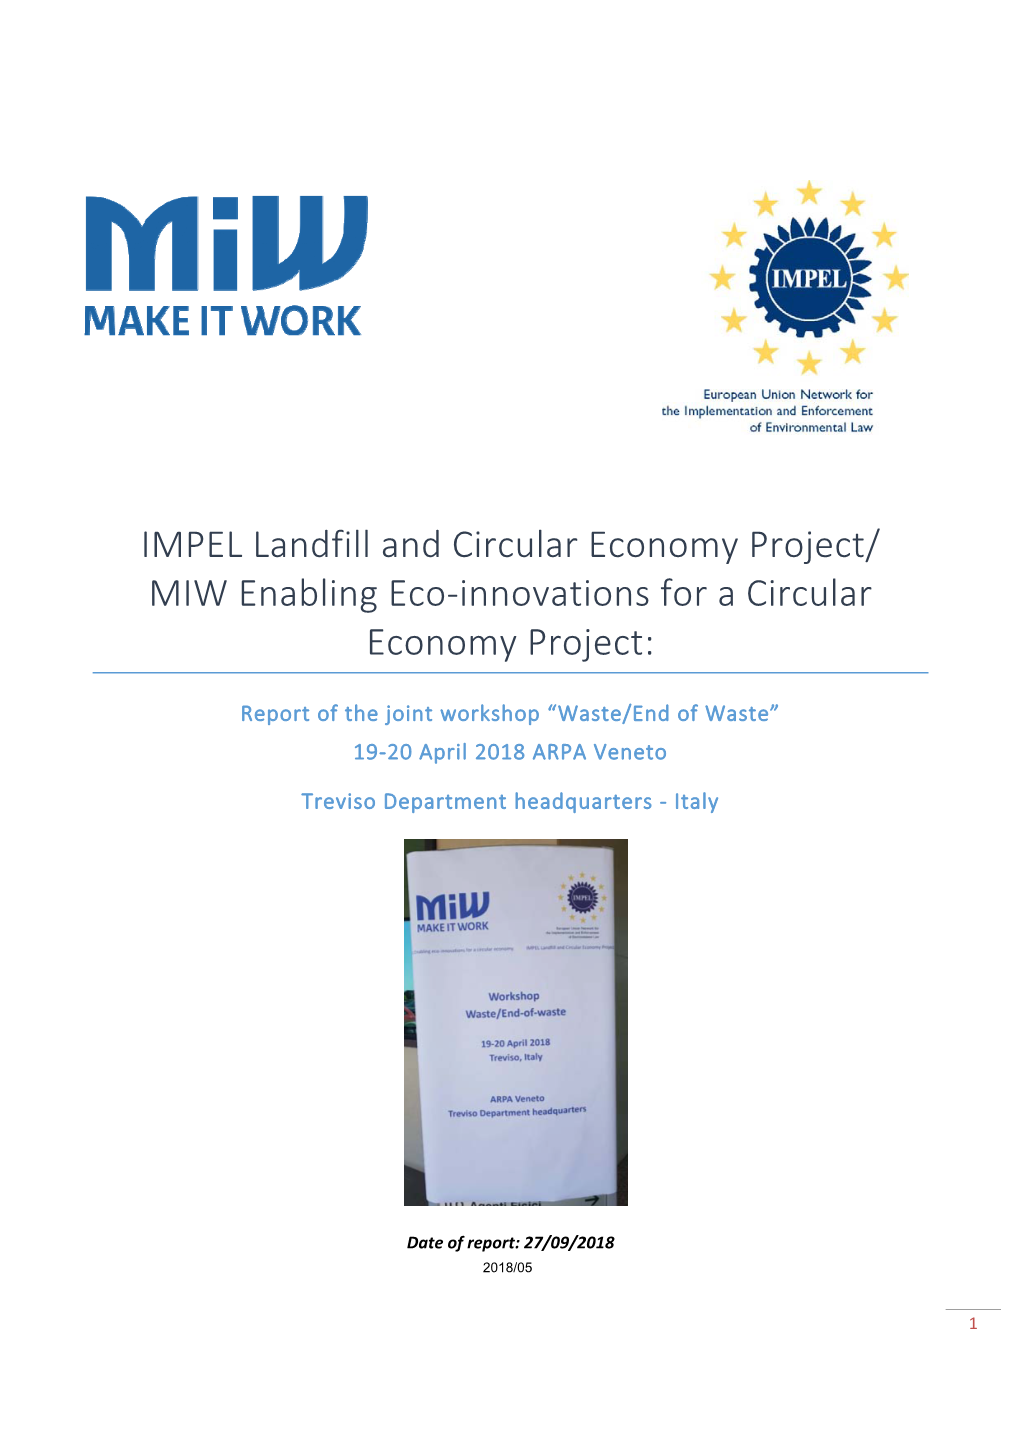 IMPEL Landfill and Circular Economy Project/ MIW Enabling Eco‐Innovations for a Circular Economy Project